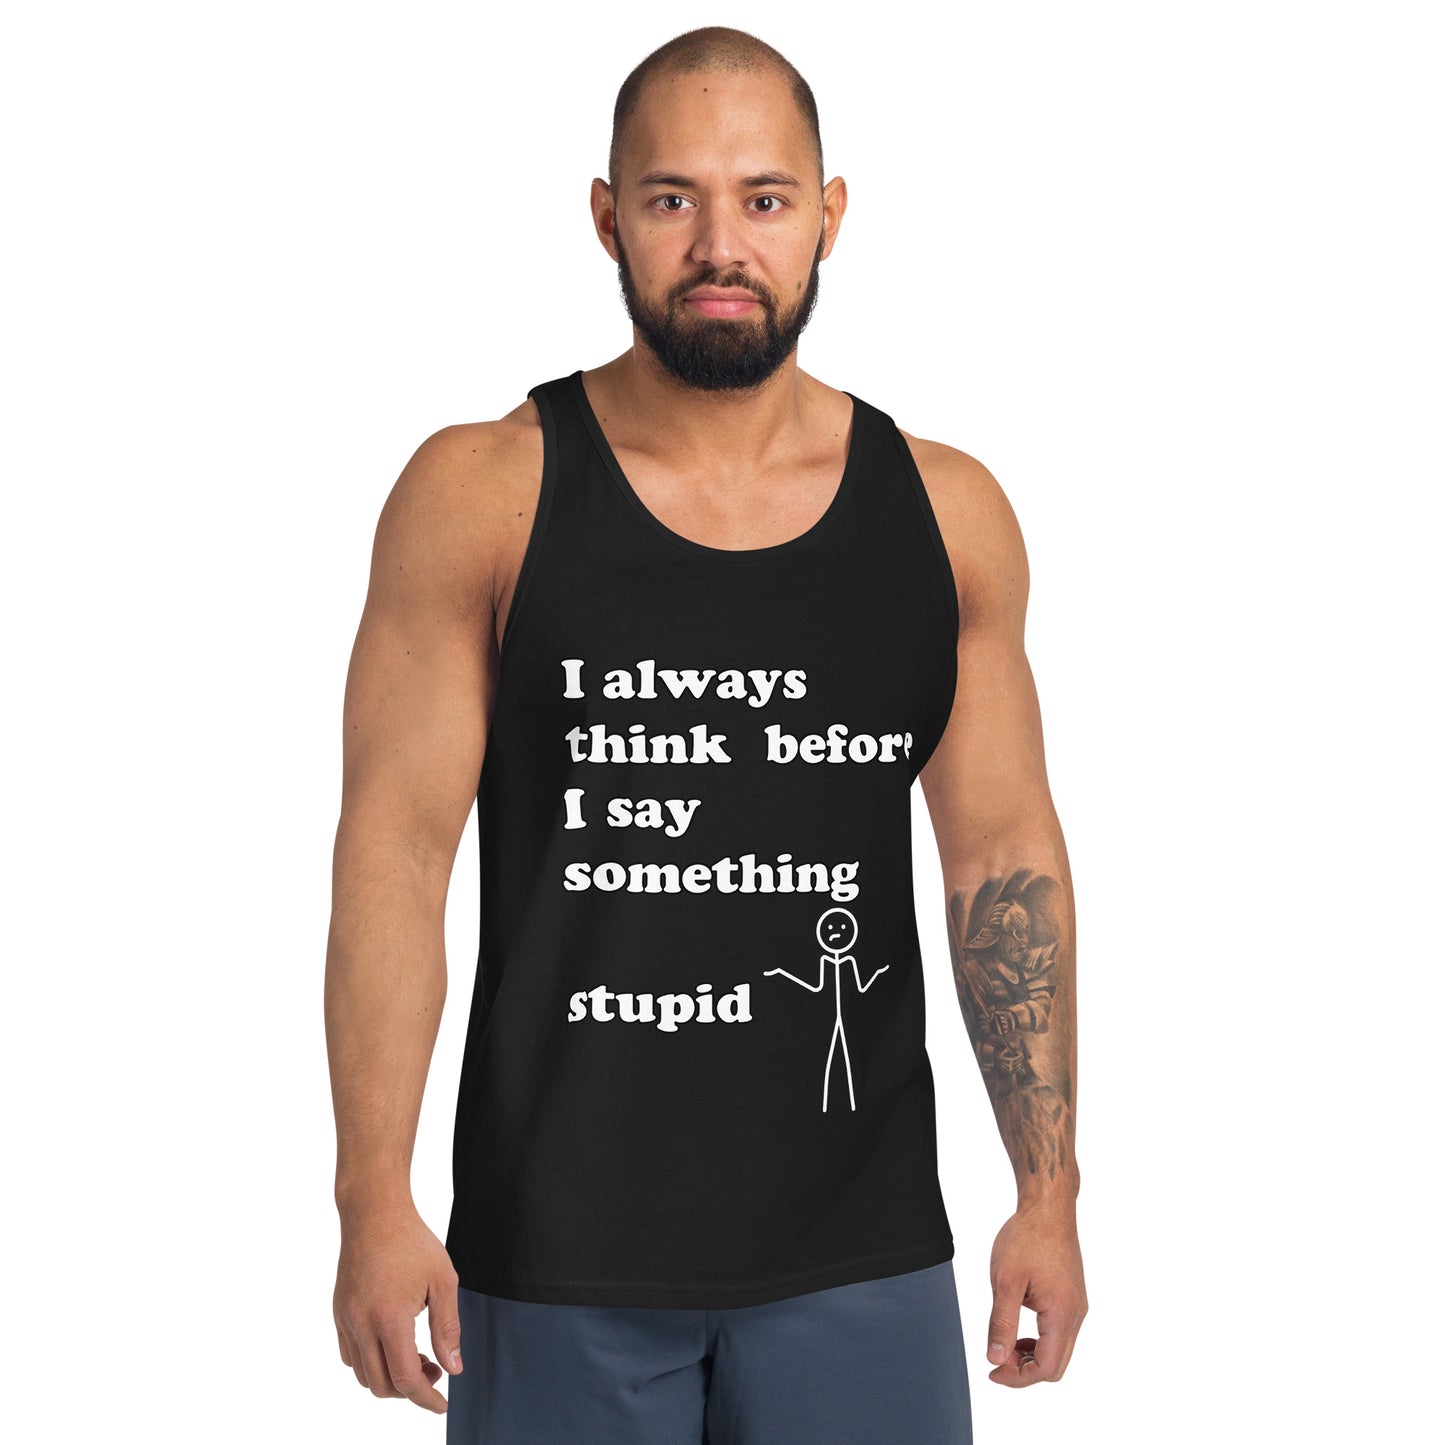 Man with black tank top with text "I always think before I say something stupid"